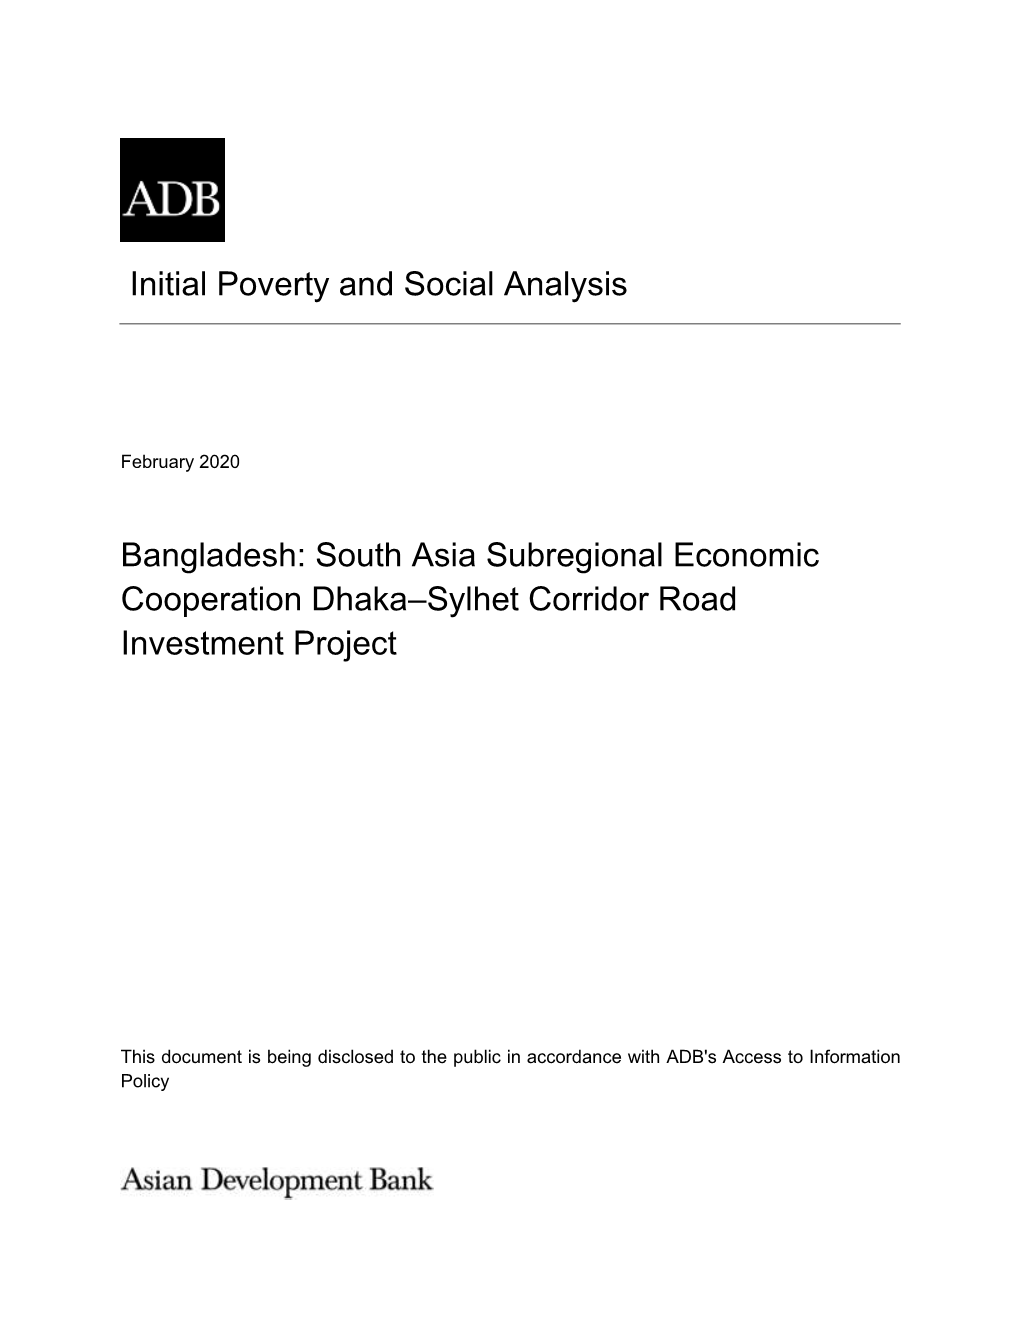 South Asia Subregional Economic Cooperation Dhaka–Sylhet Corridor Road Investment Project